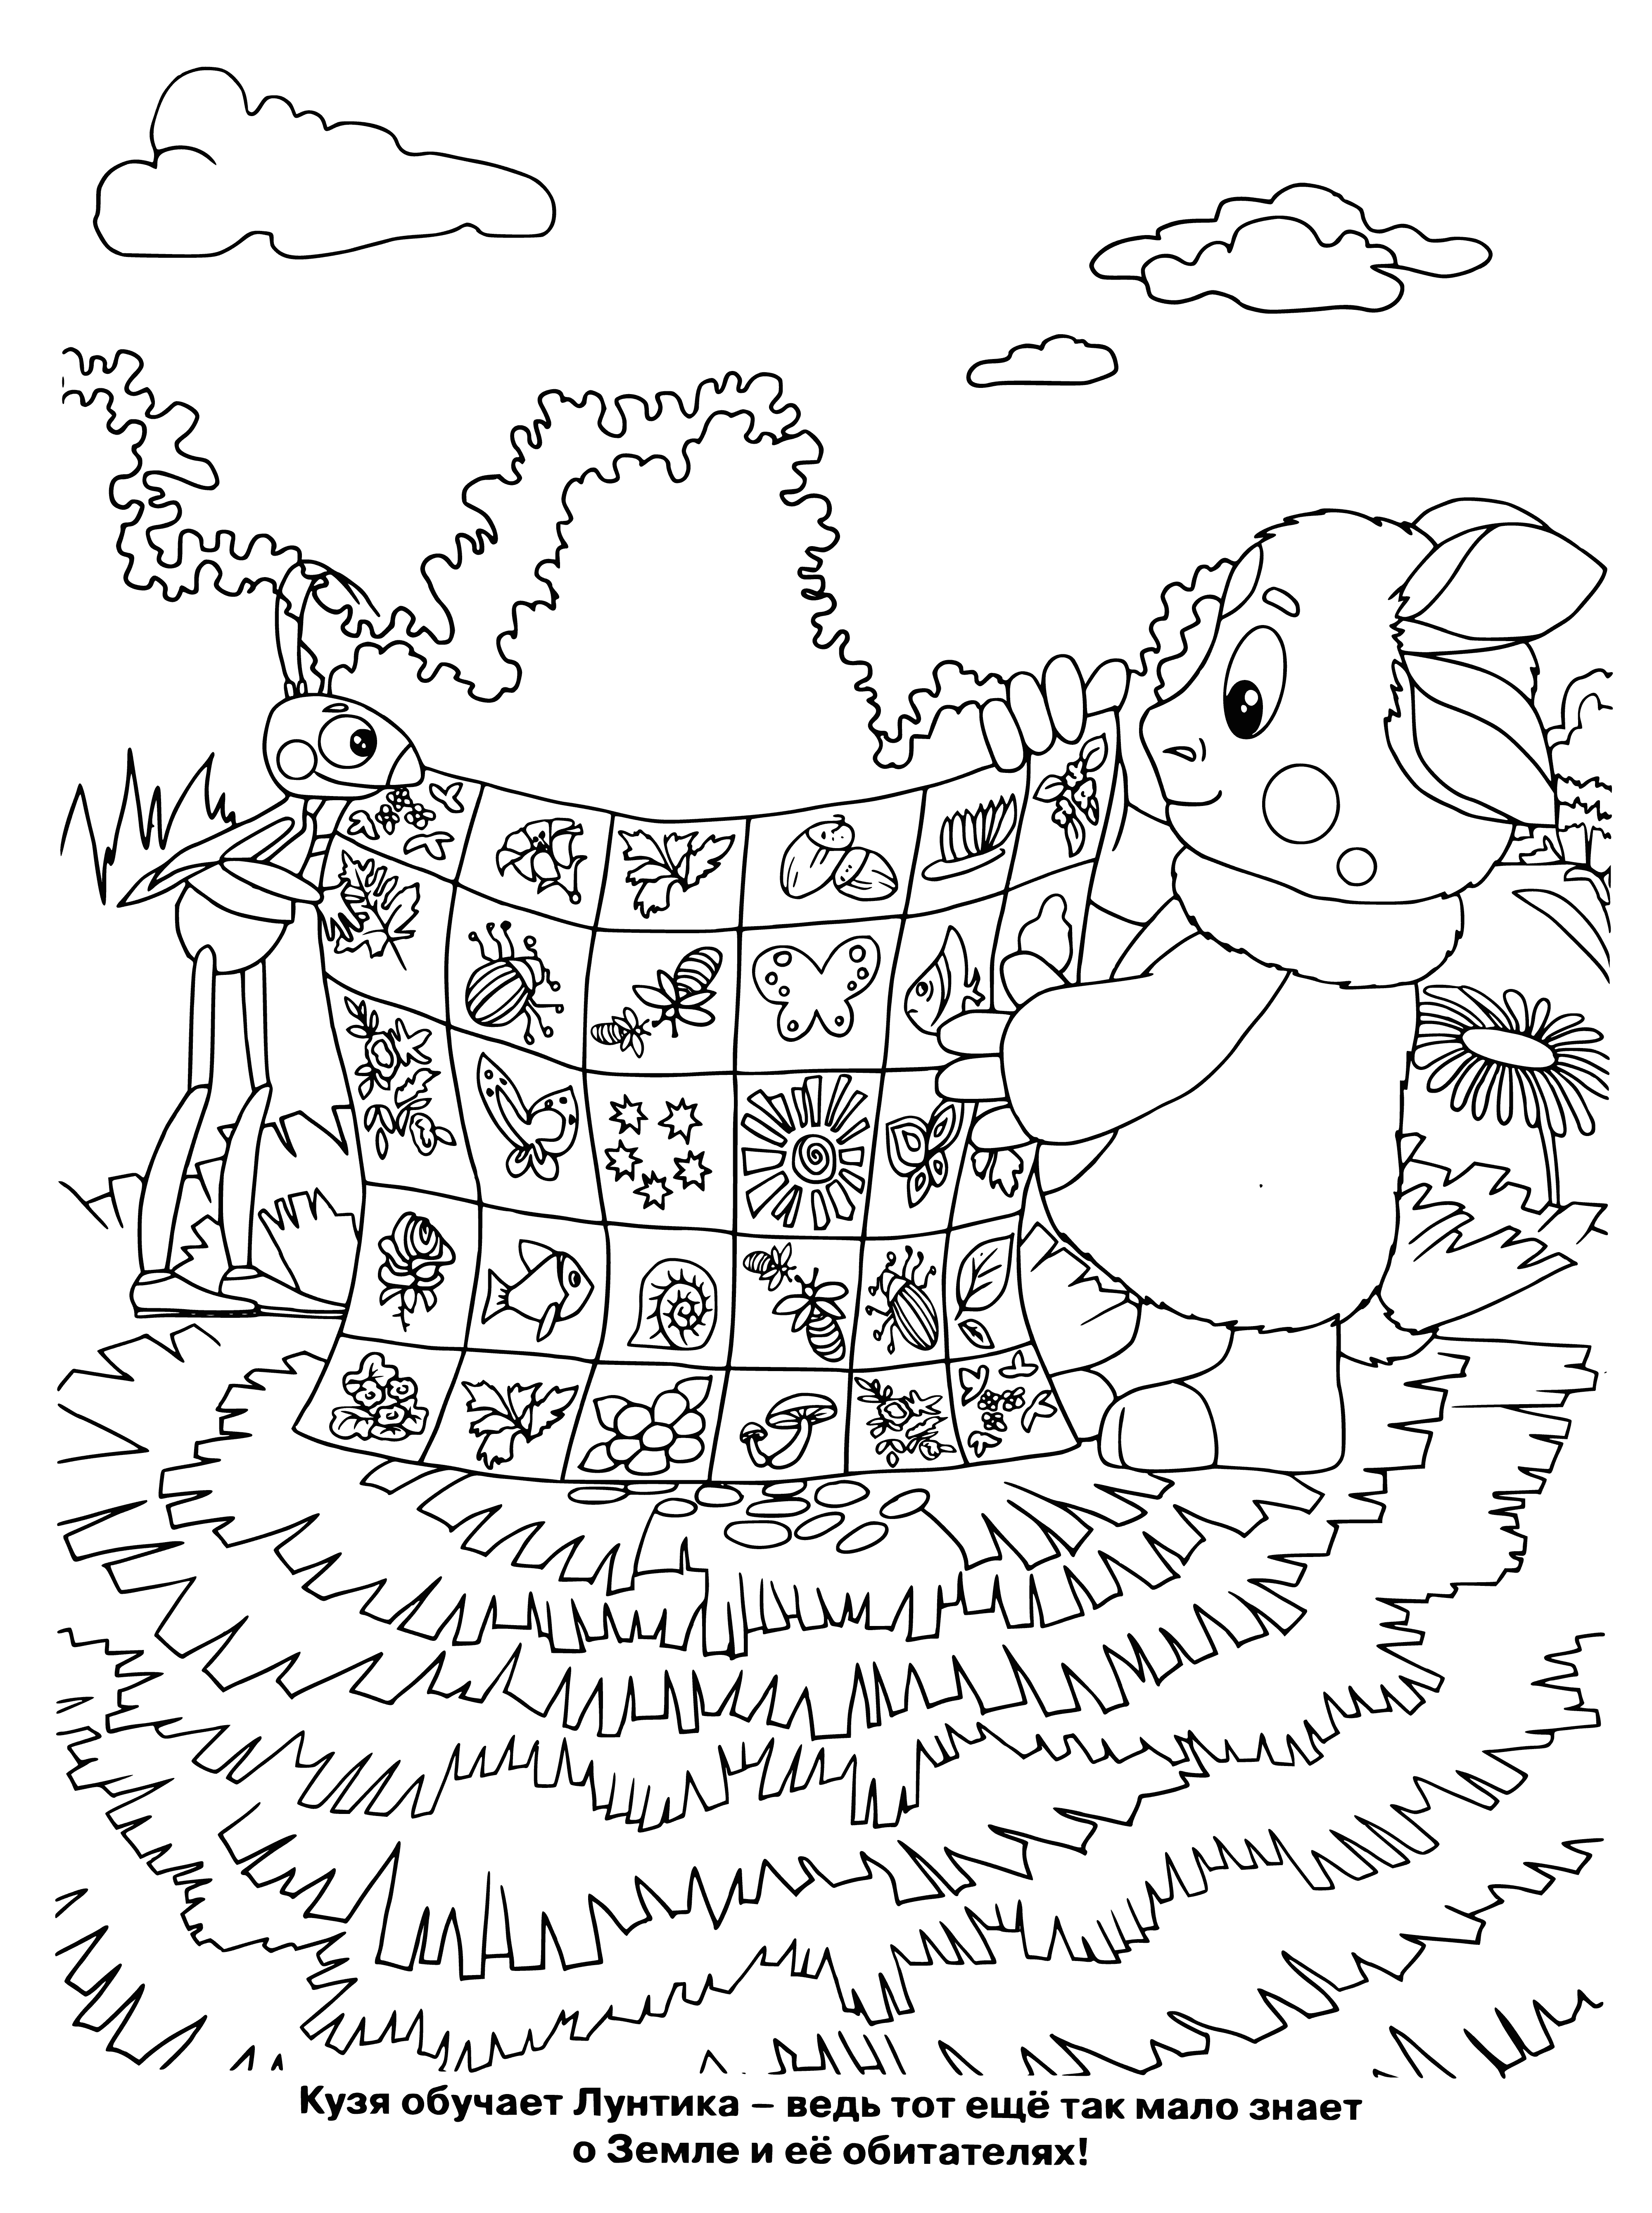 coloring page: 3 silly creatures w/ colorful handkerchiefs surround them, happy & cheerful.